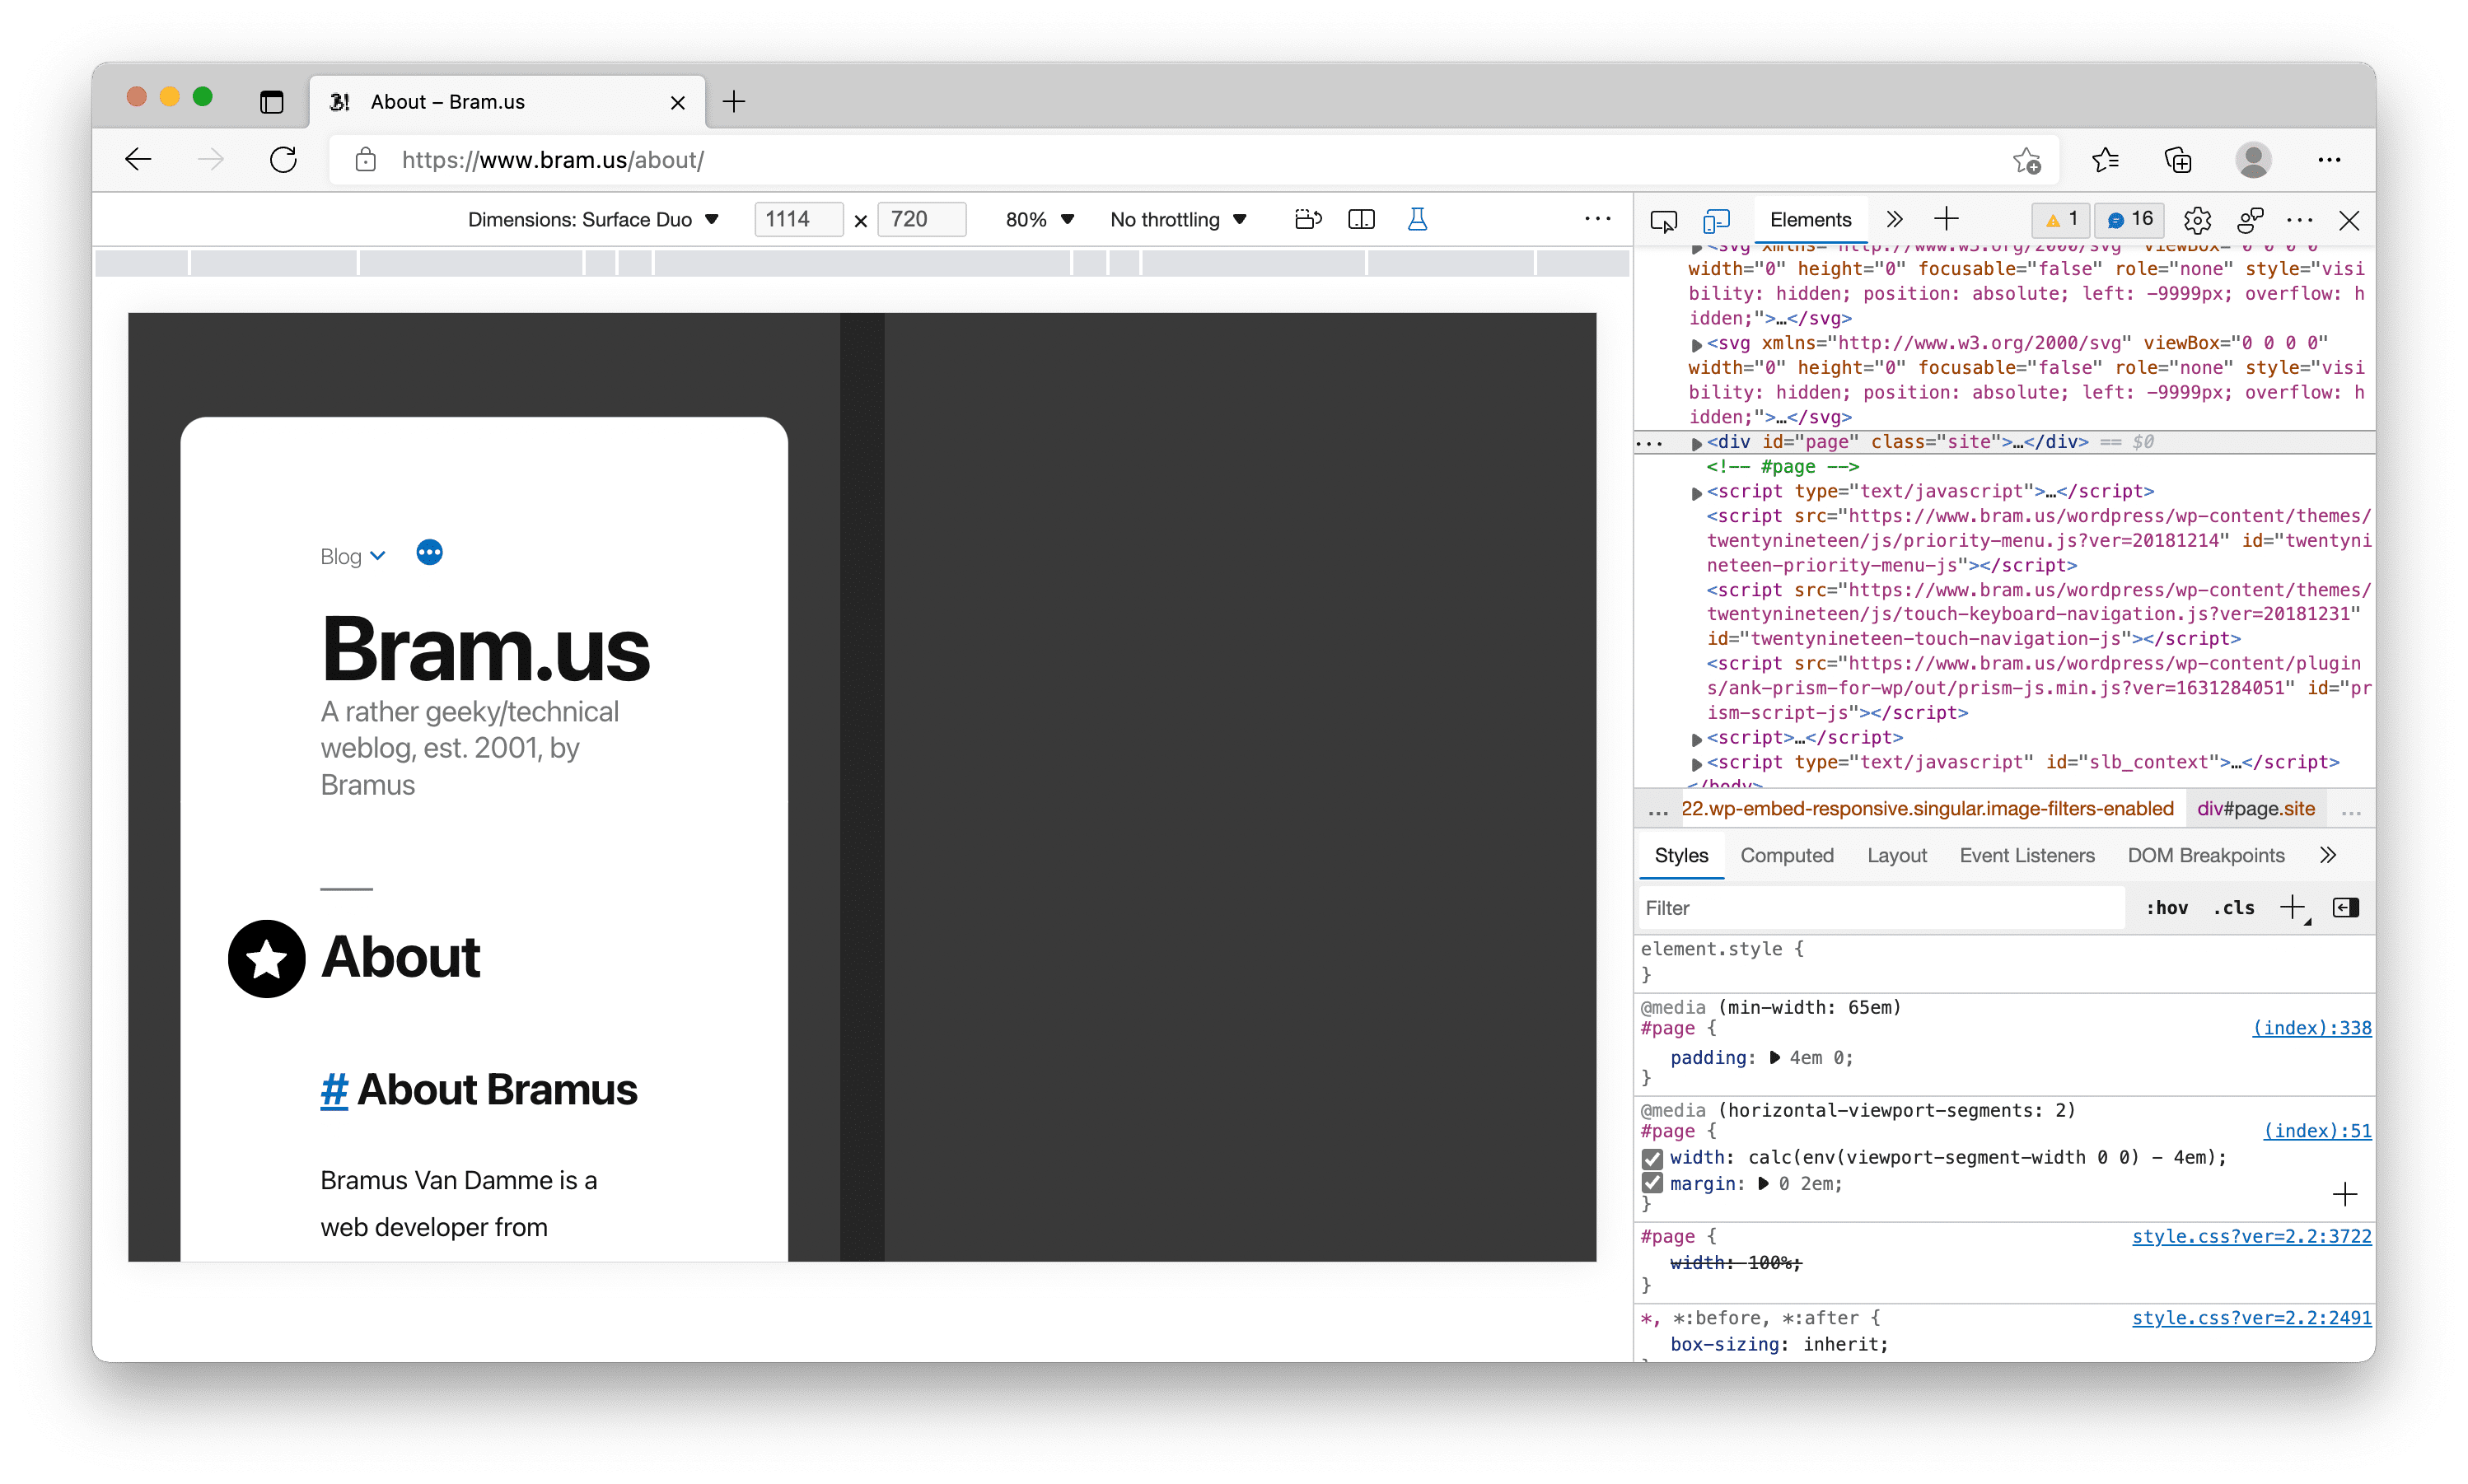 Edge DevTools with Dual-Screen Mode enabled